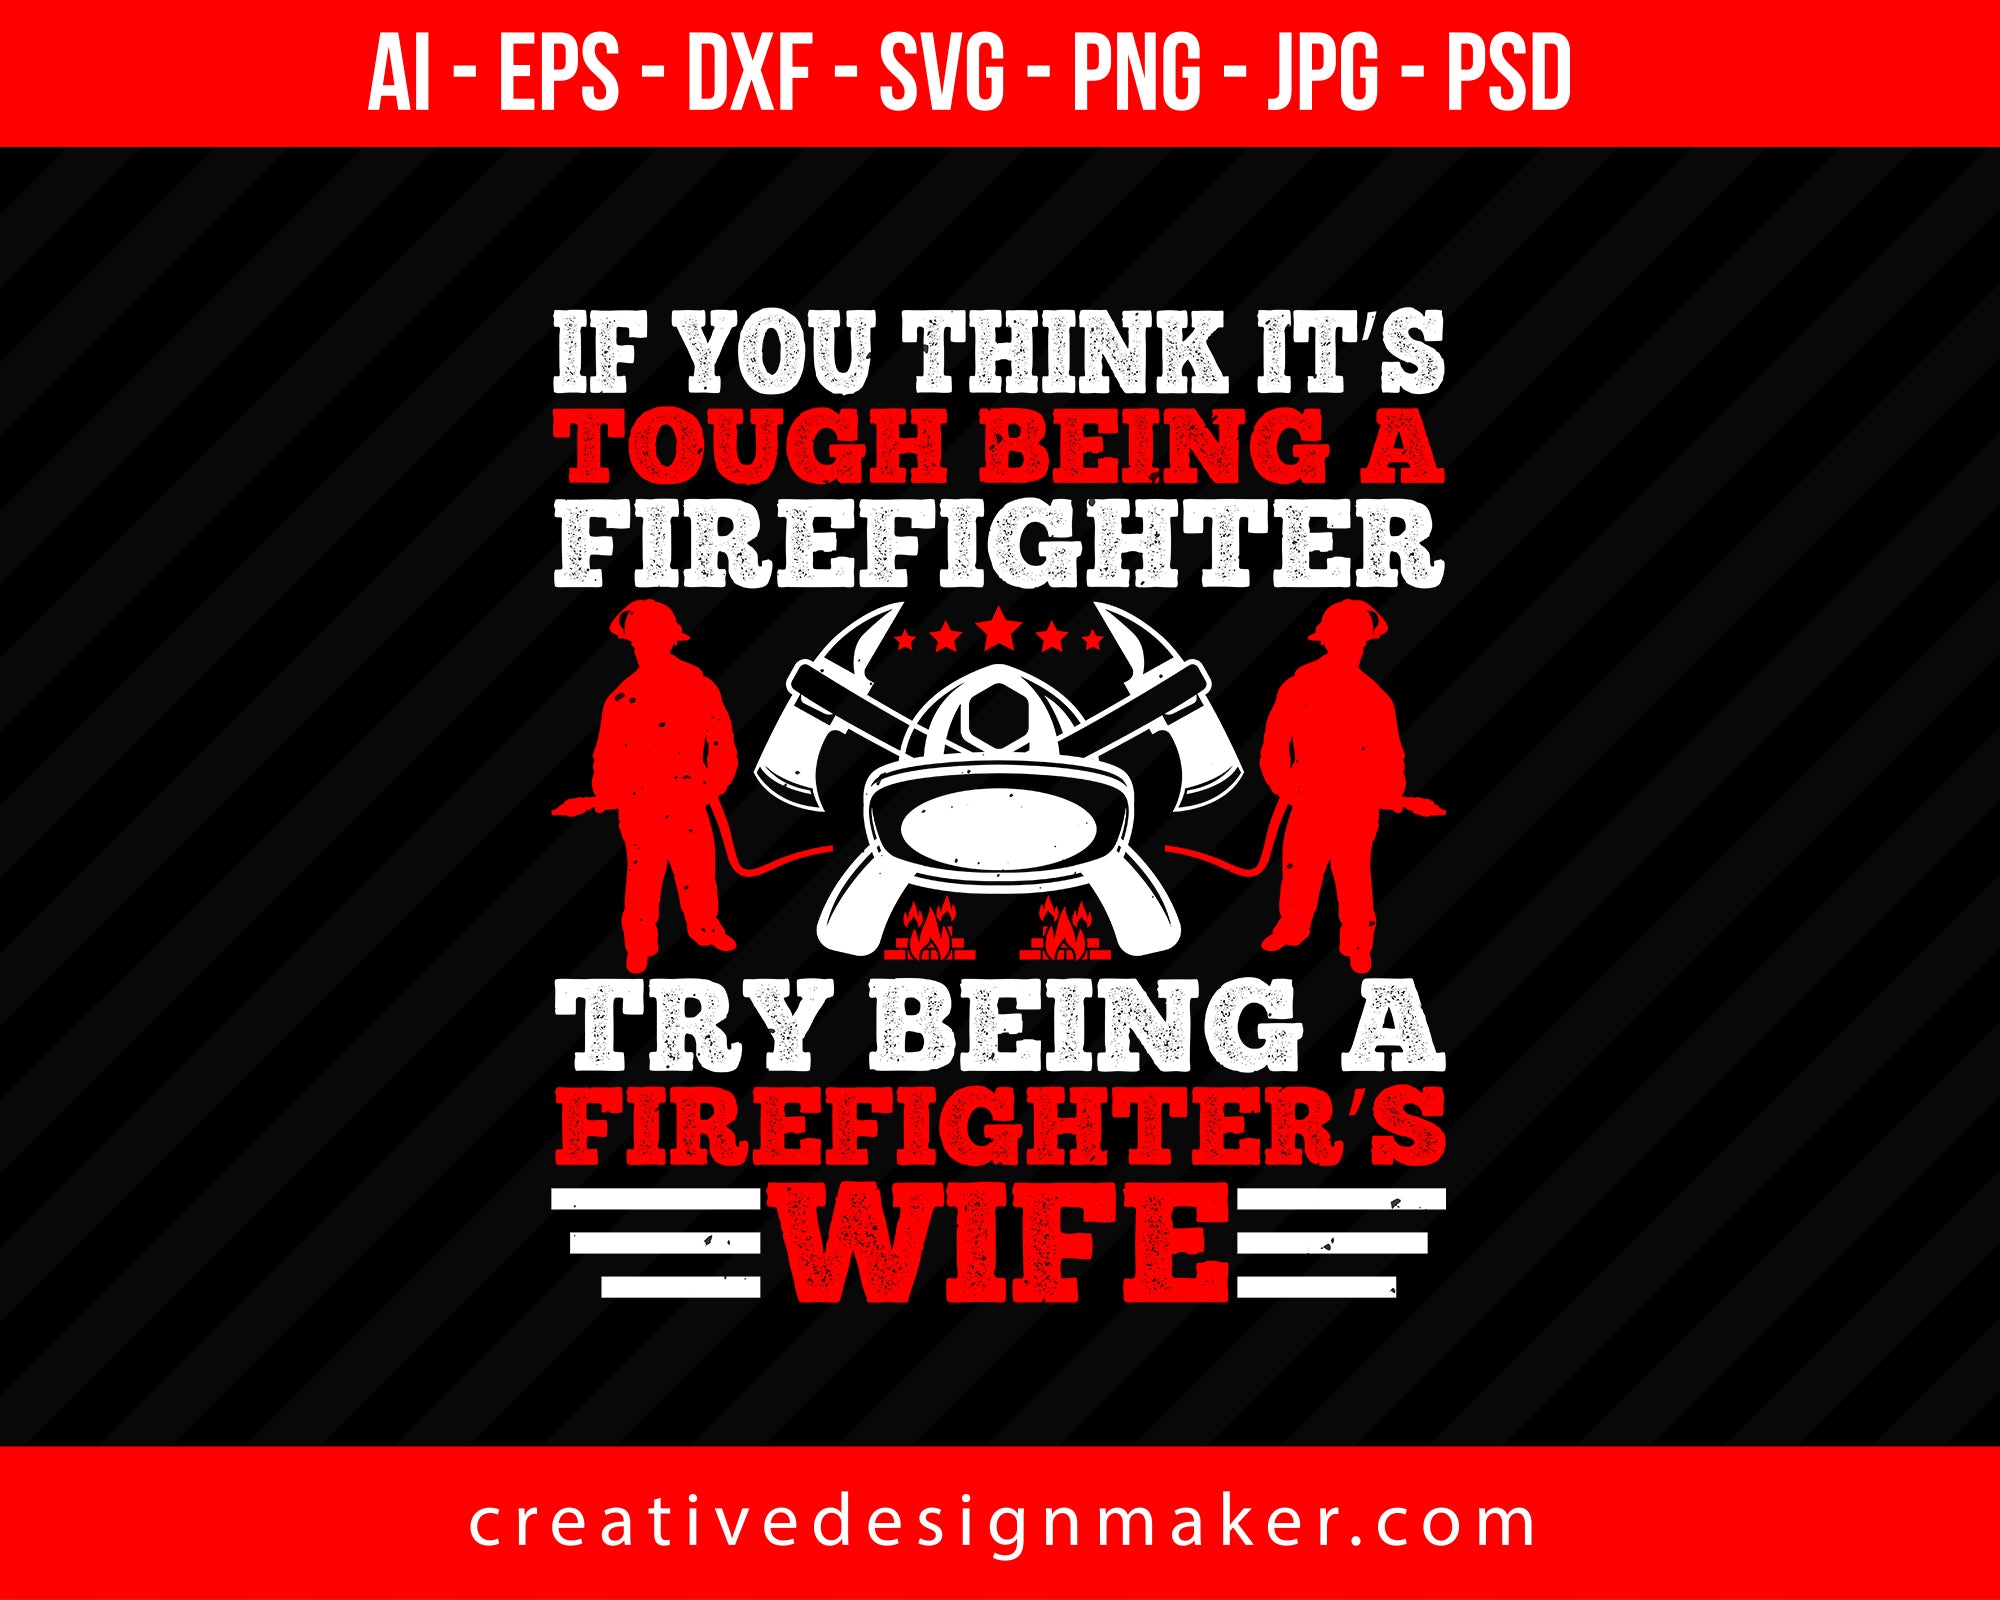 If You Think It’s Tough Being A Firefighter, Try Being A Firefighter’s Wife Print Ready Editable T-Shirt SVG Design!